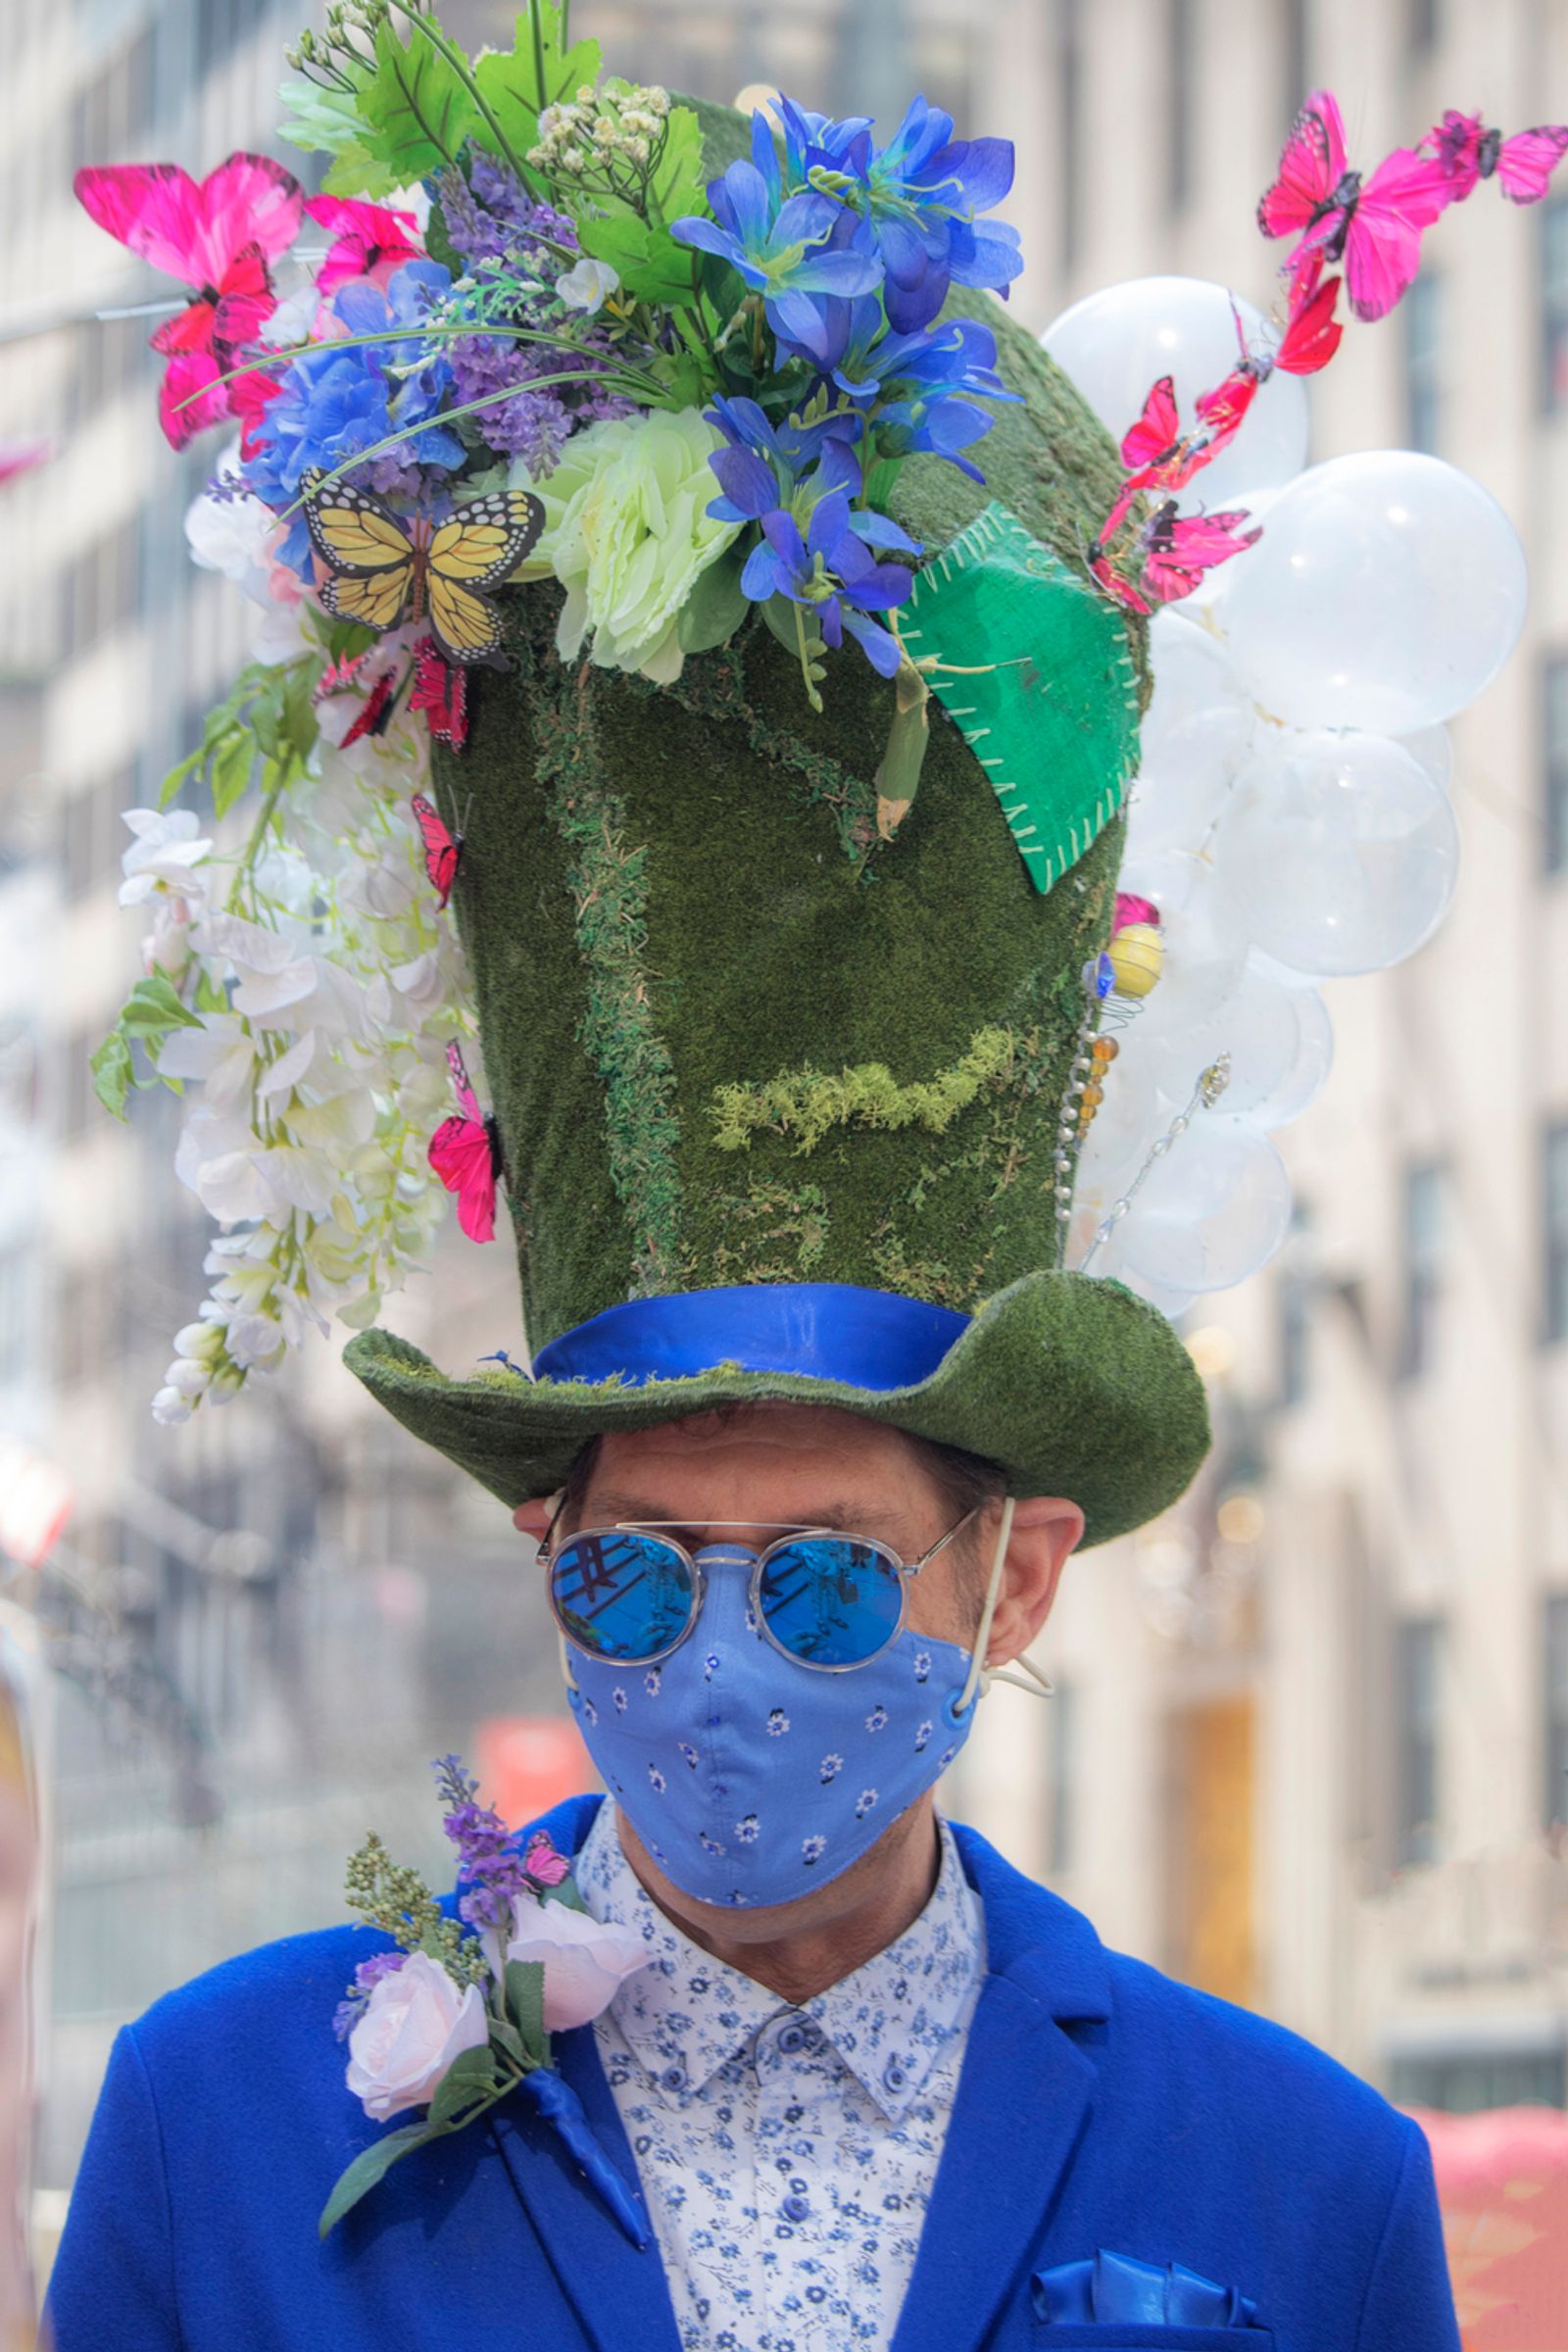 © Natalia L Rudychev - Title: In Full Bloom Pandemic Easter celebration in NYC